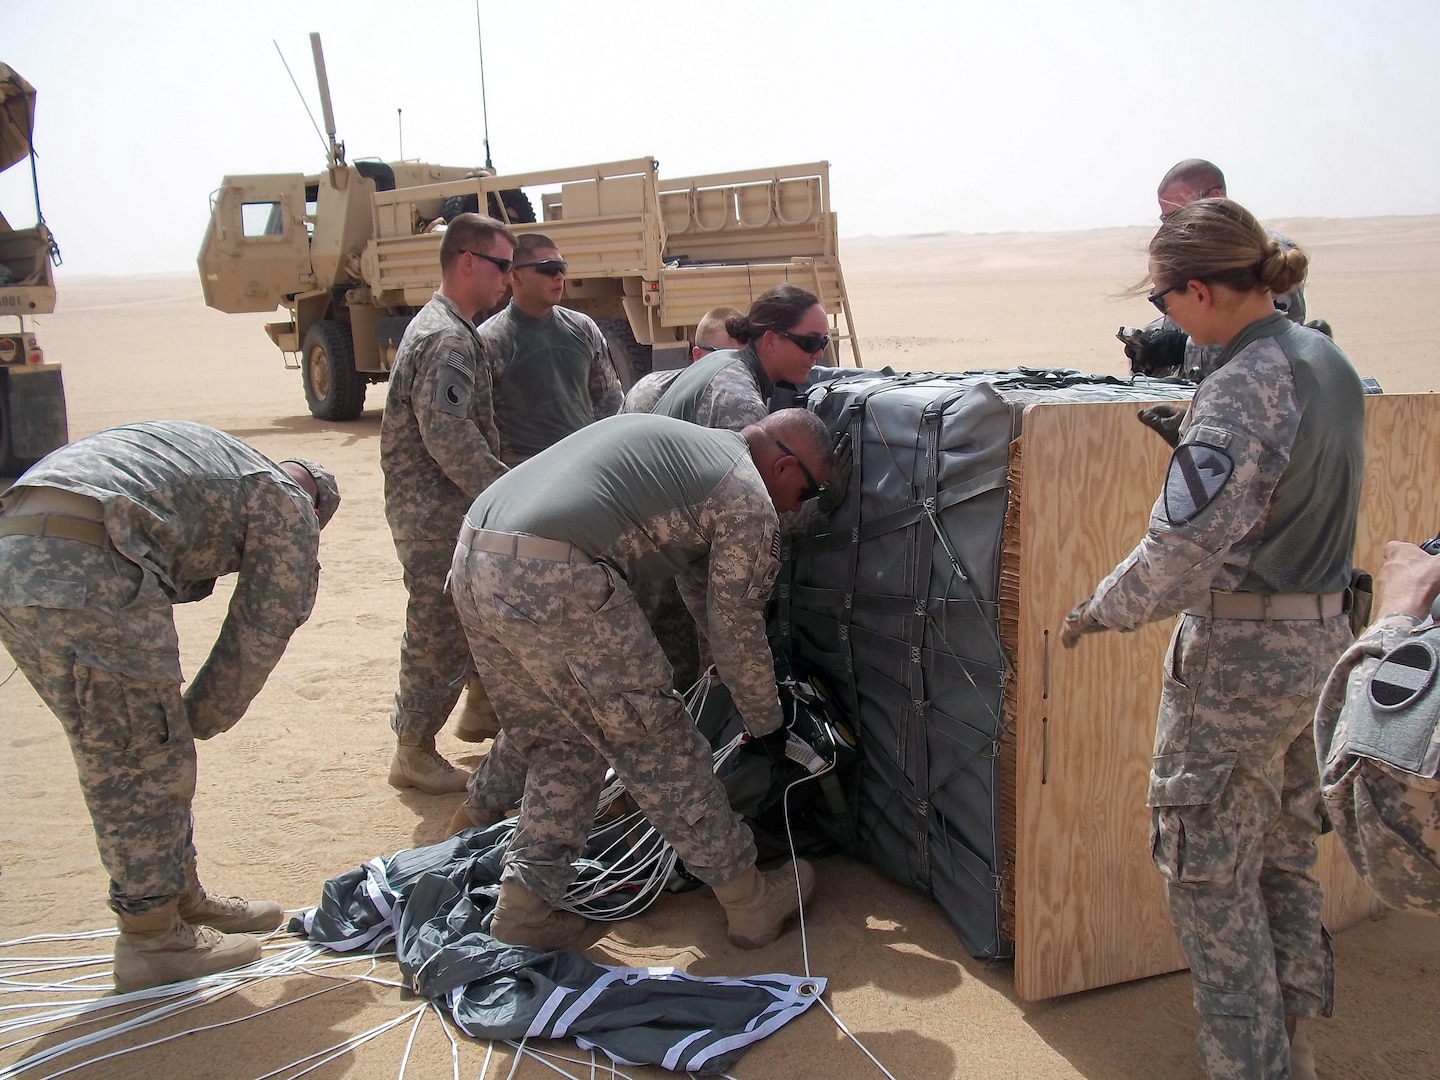 Soldiers of the 1204th Aviation Support Battalion and 1st Squadron, 7th Cavalry Regiment, recover a resupply air drop that used the Joint Precision Aerial Drop Systems near Camp Buehring, Kuwait. The JPADS were dropped from an Air Force C-17 Globemaster III aircraft as part of a training exercise in the region.